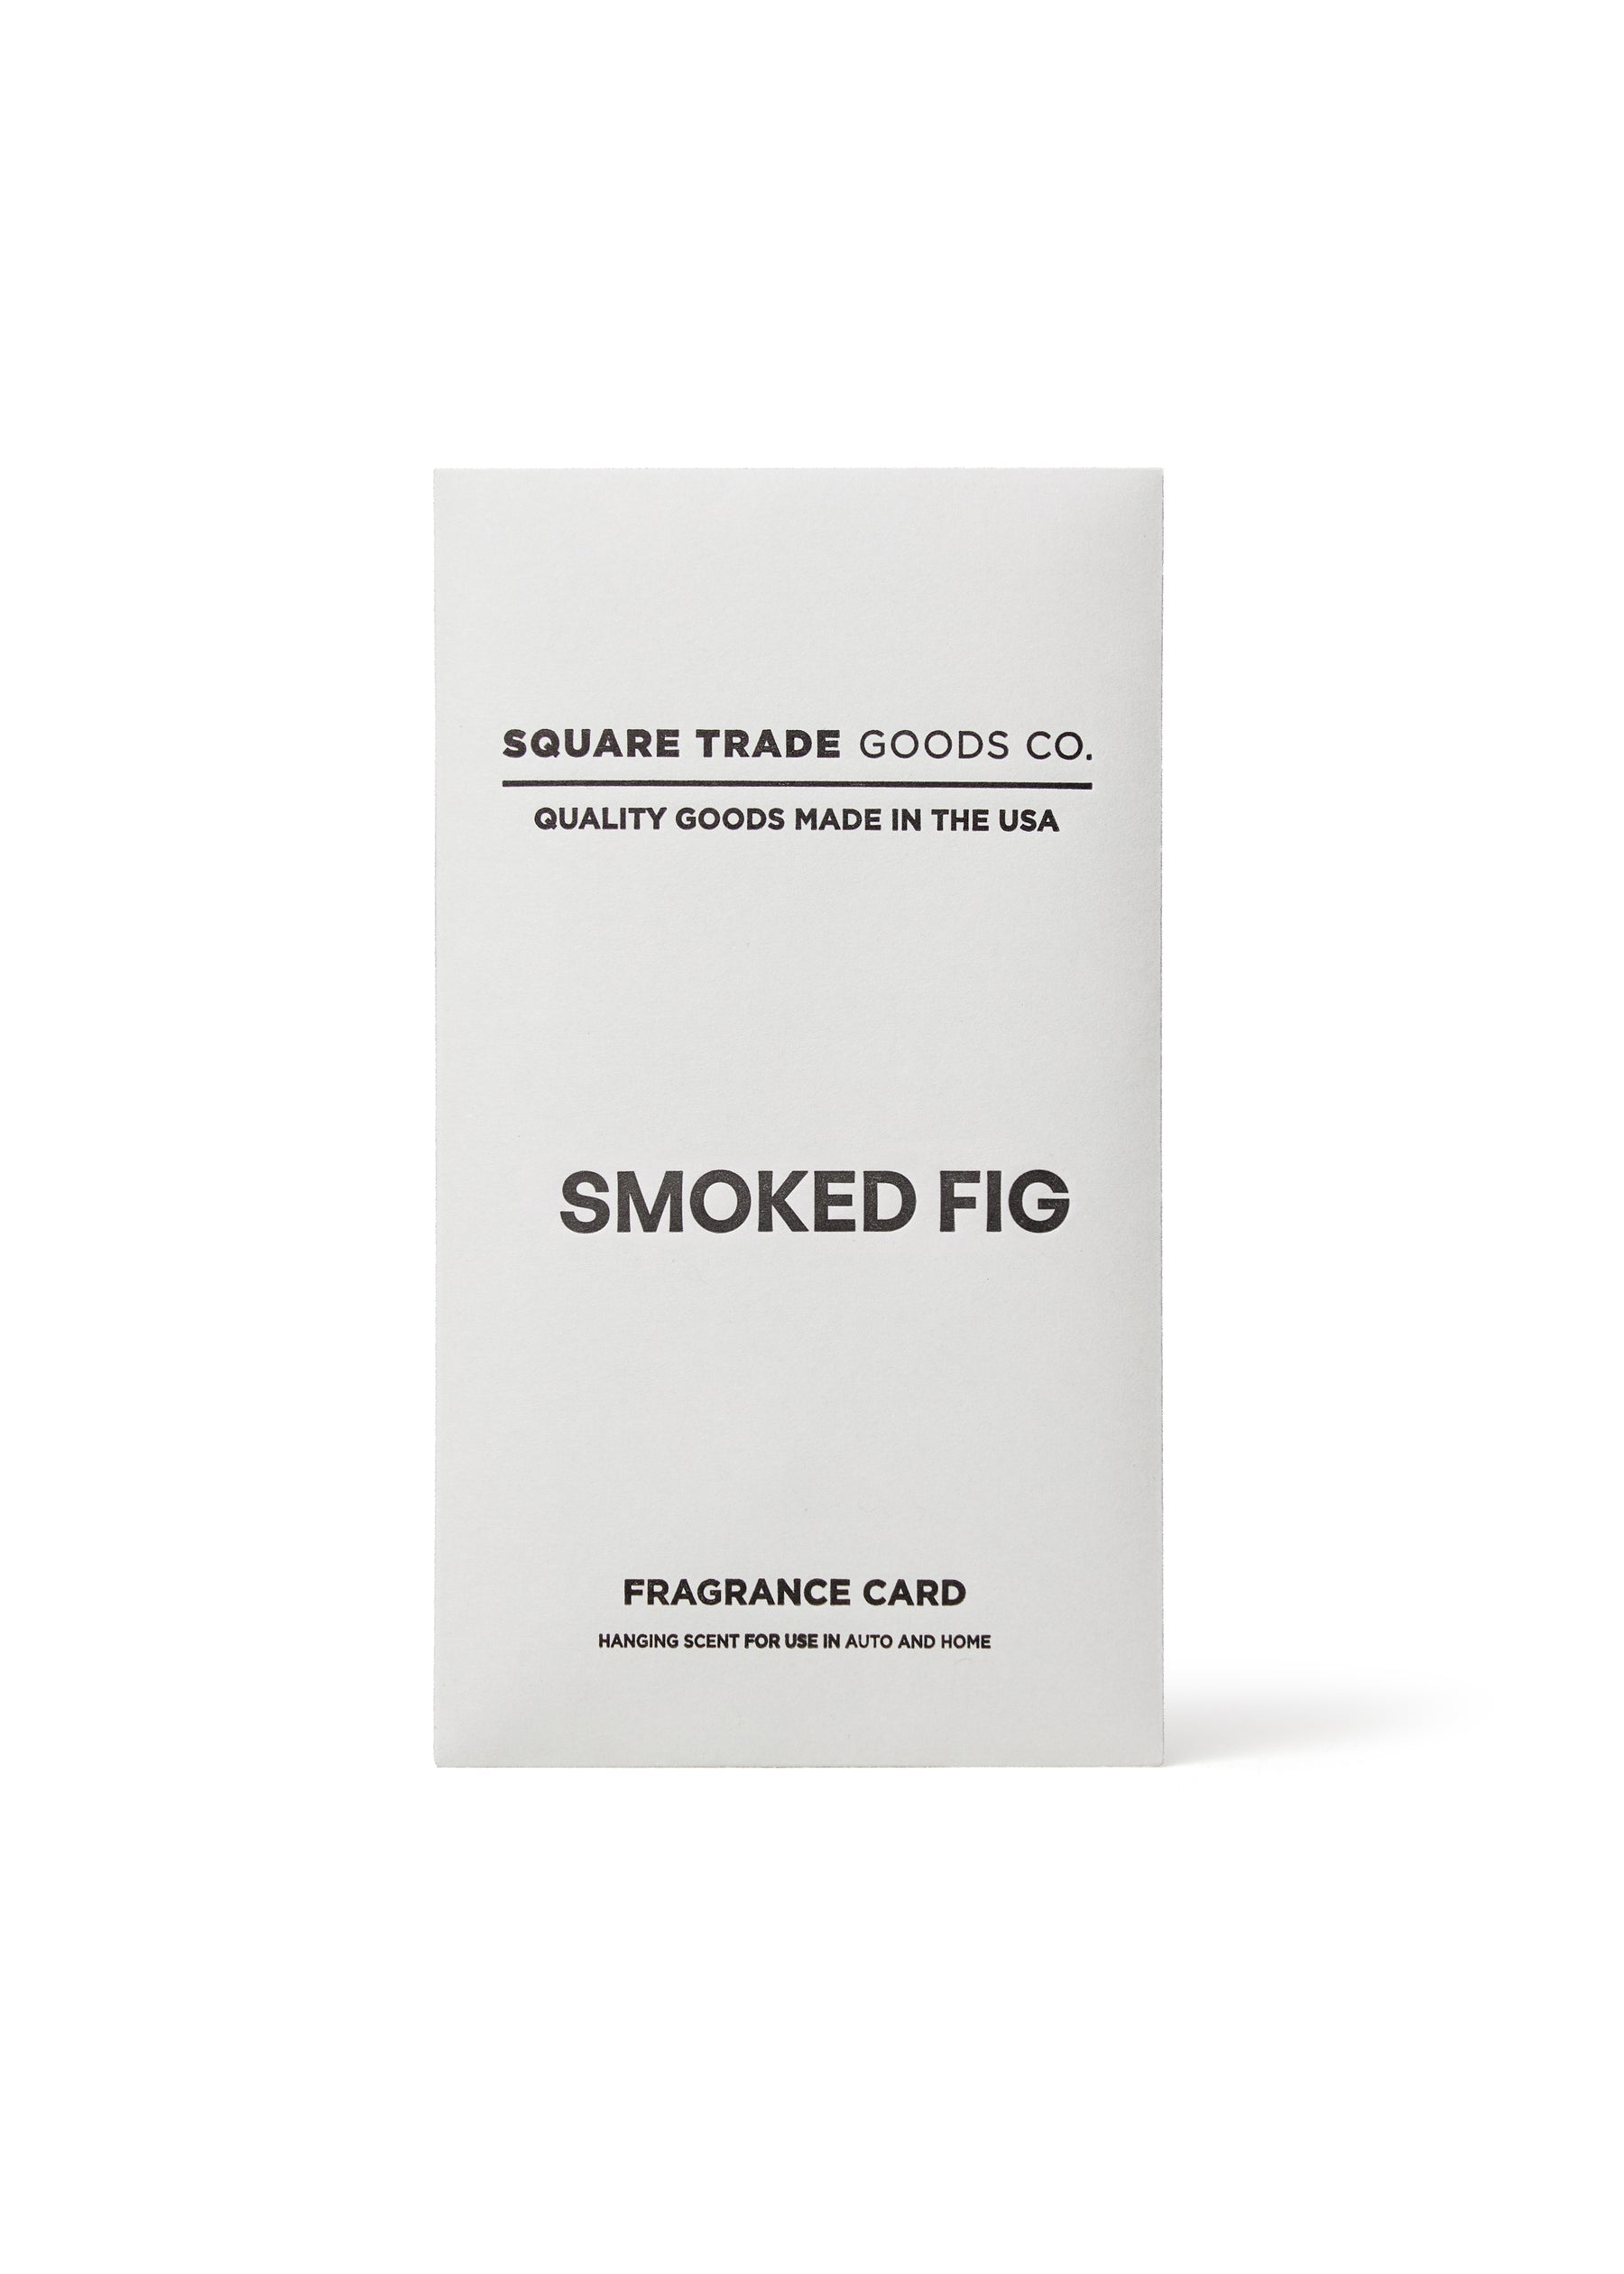 Smoked Fig Fragrance Cards - Square Trade Goods Co. - Bluecashew Kitchen Homestead